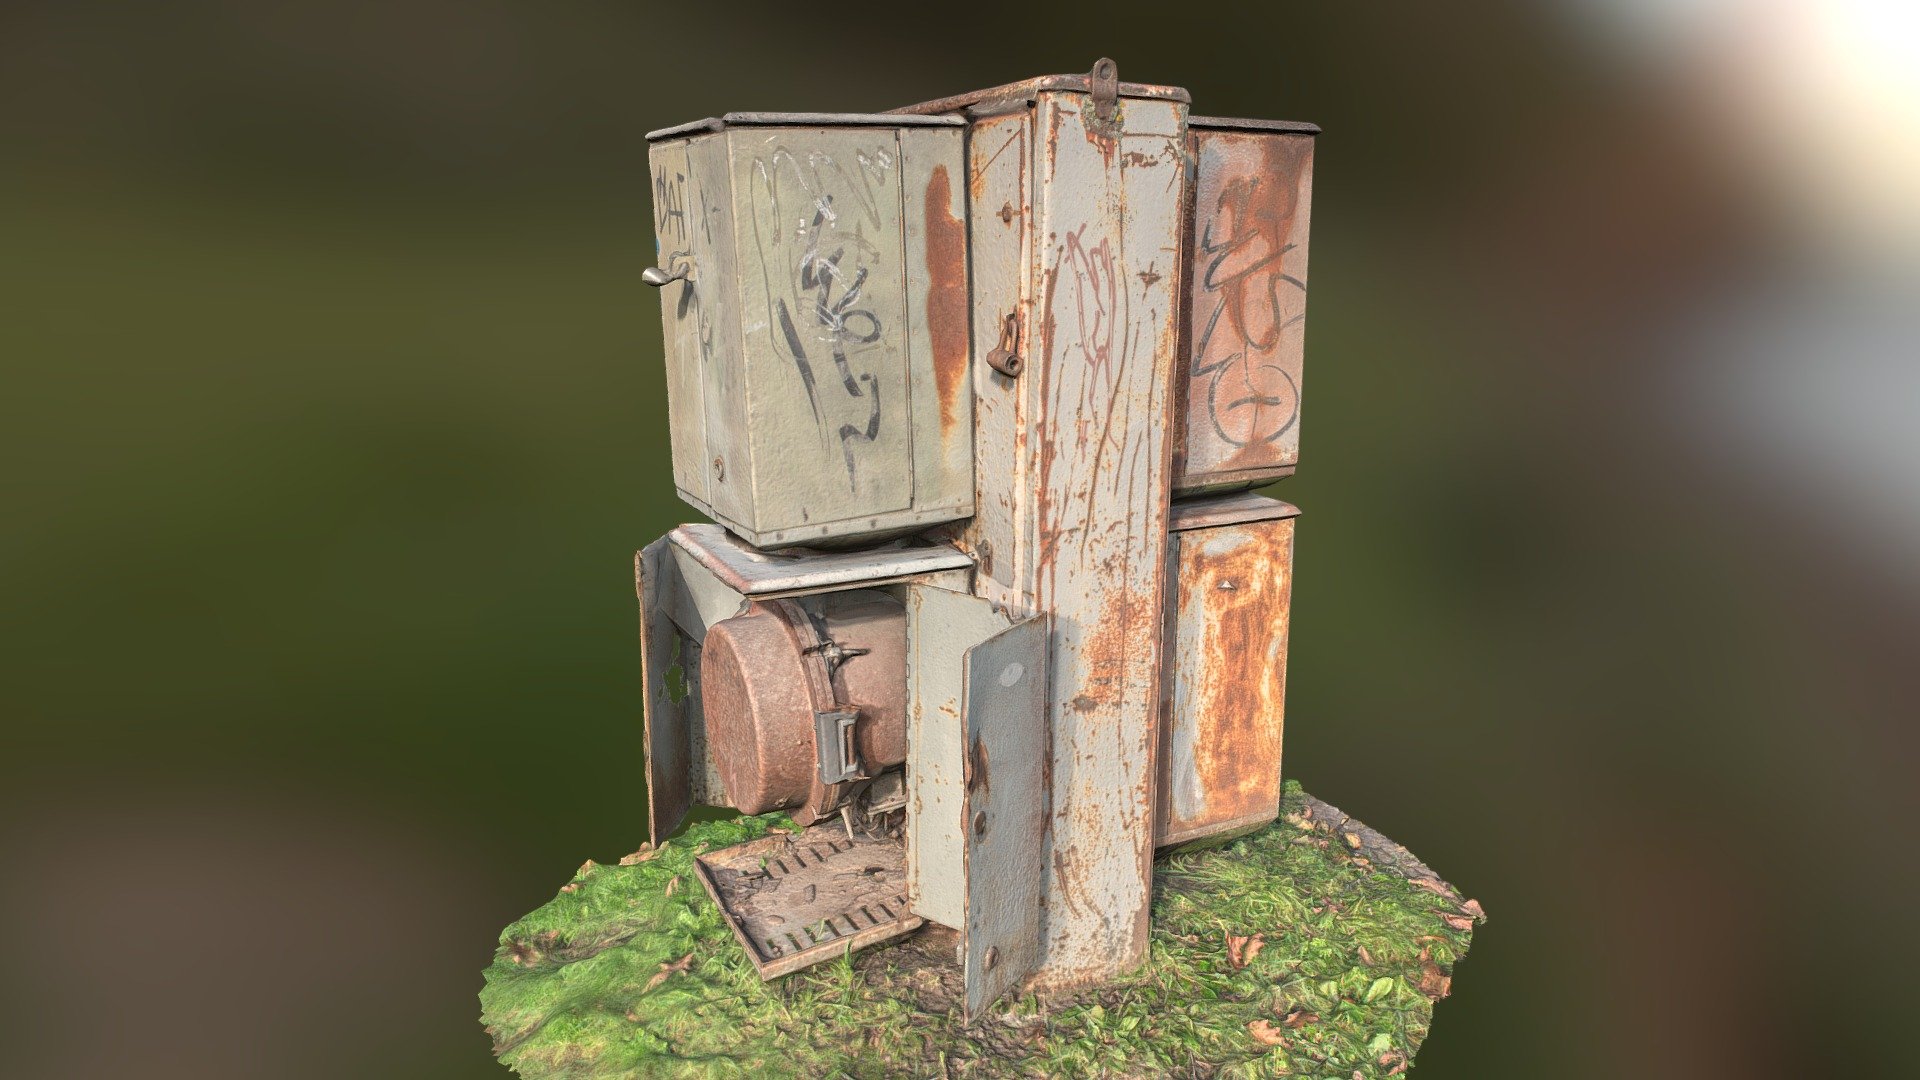 3D scan of some old, rusty metalic boxes.
One box open with rusty metalic pipes inside.
With Normal map 3d model